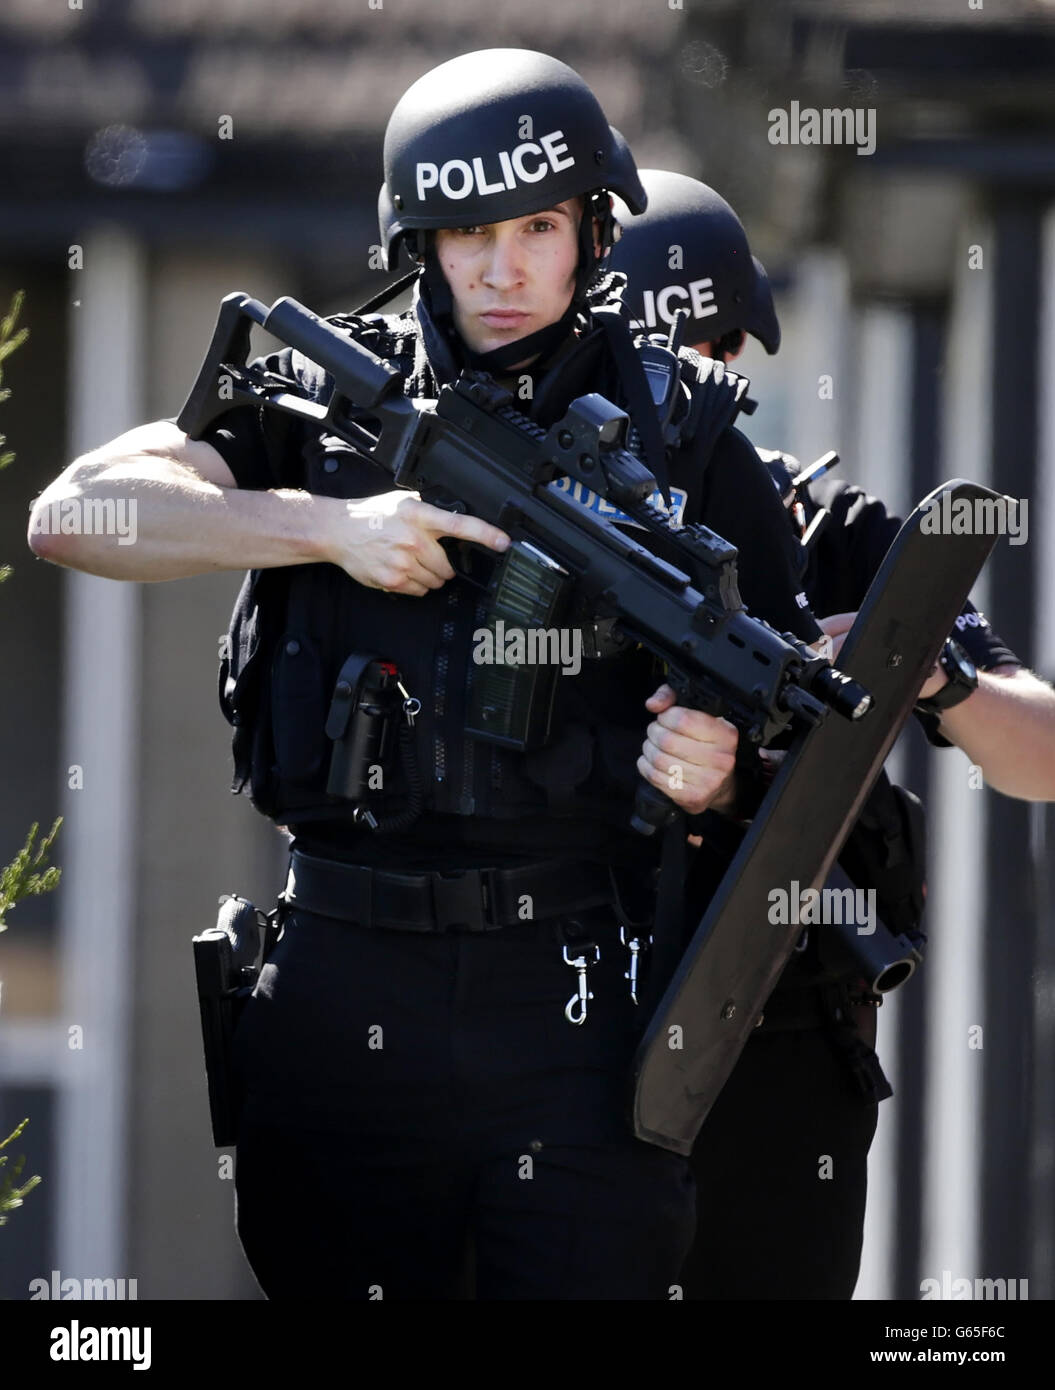 Police respond to incident in flat Stock Photo